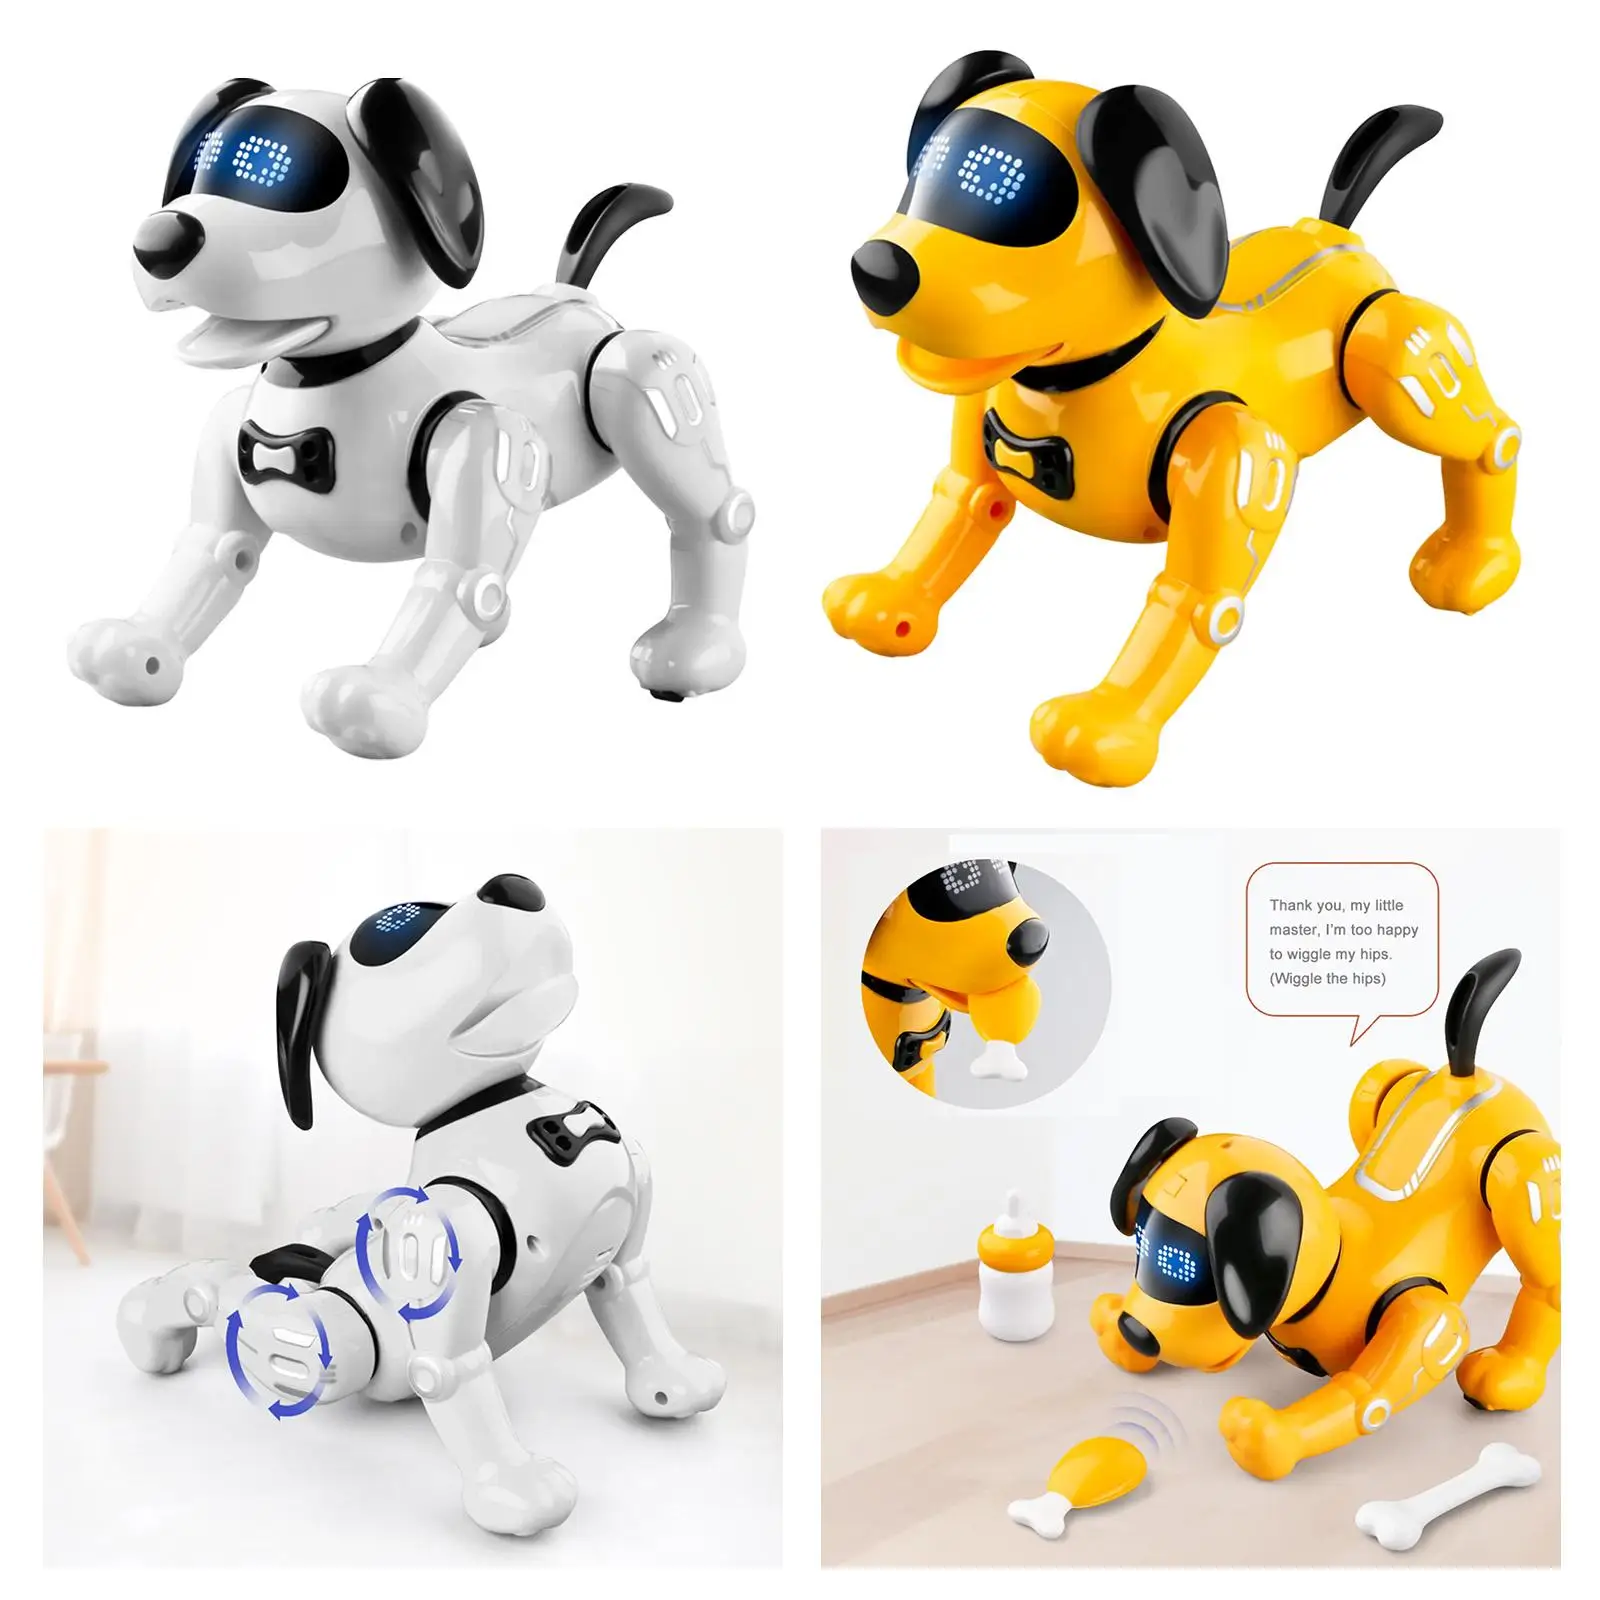 Remote Control Robot Dog with Touch Function Robot Dog Toy RC Robot Dog for Toddlers Kids Boys and Girls Age 5 6 7 8 9 10